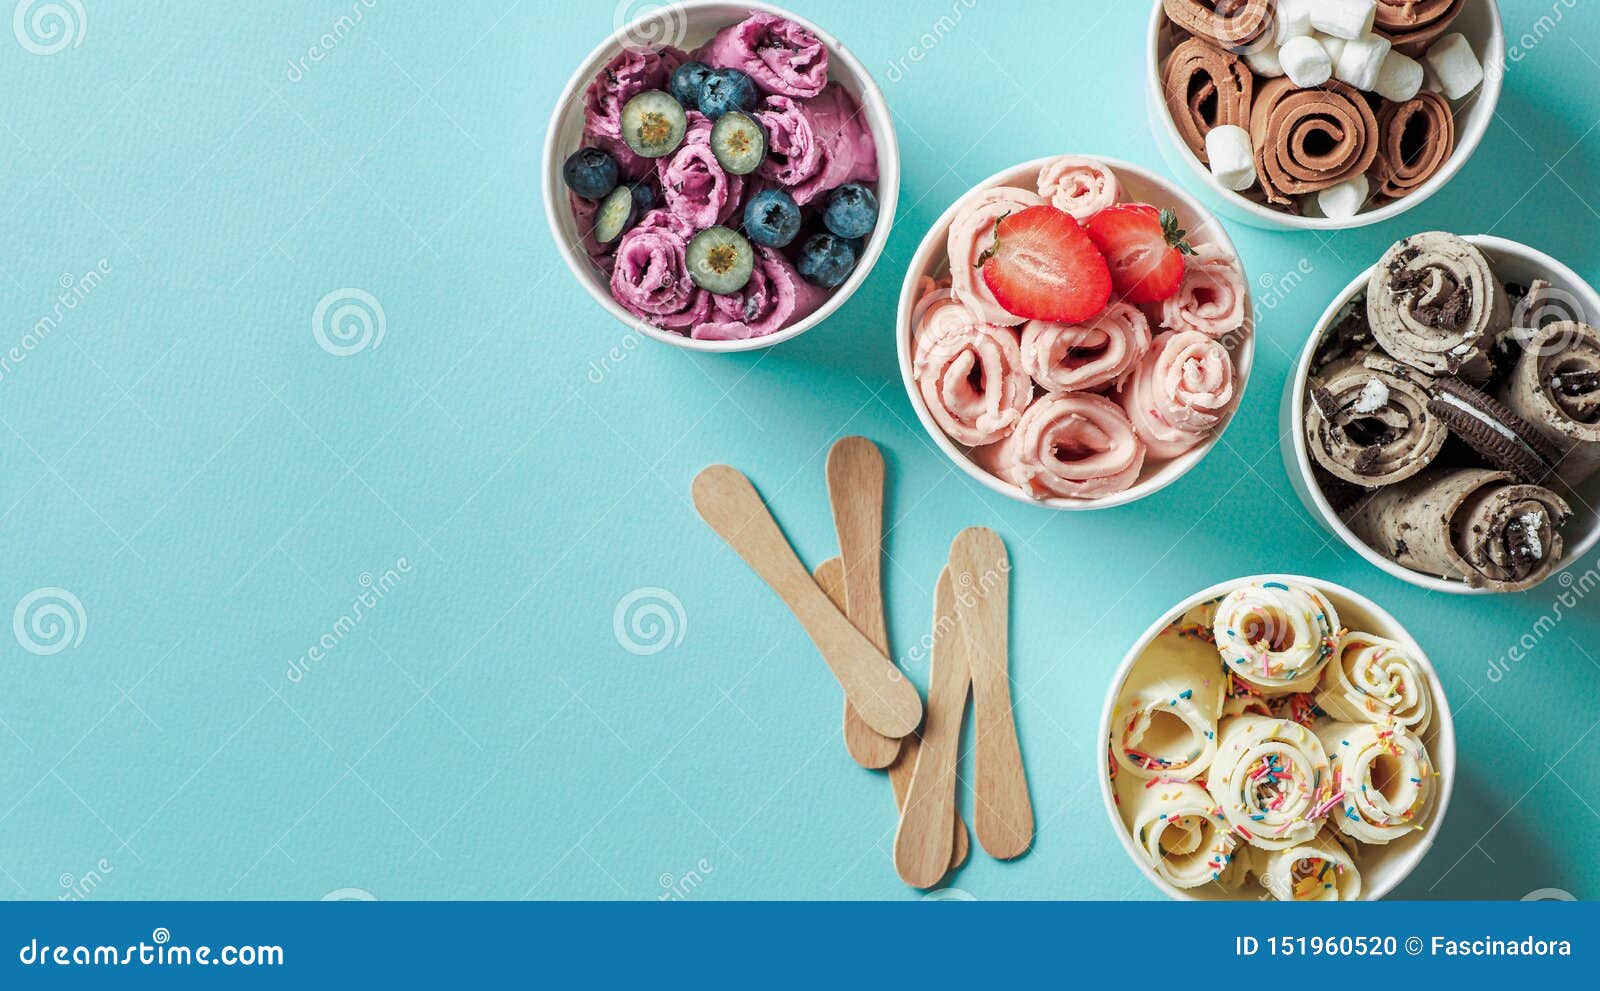 rolled ice creams in cone cups on blue background